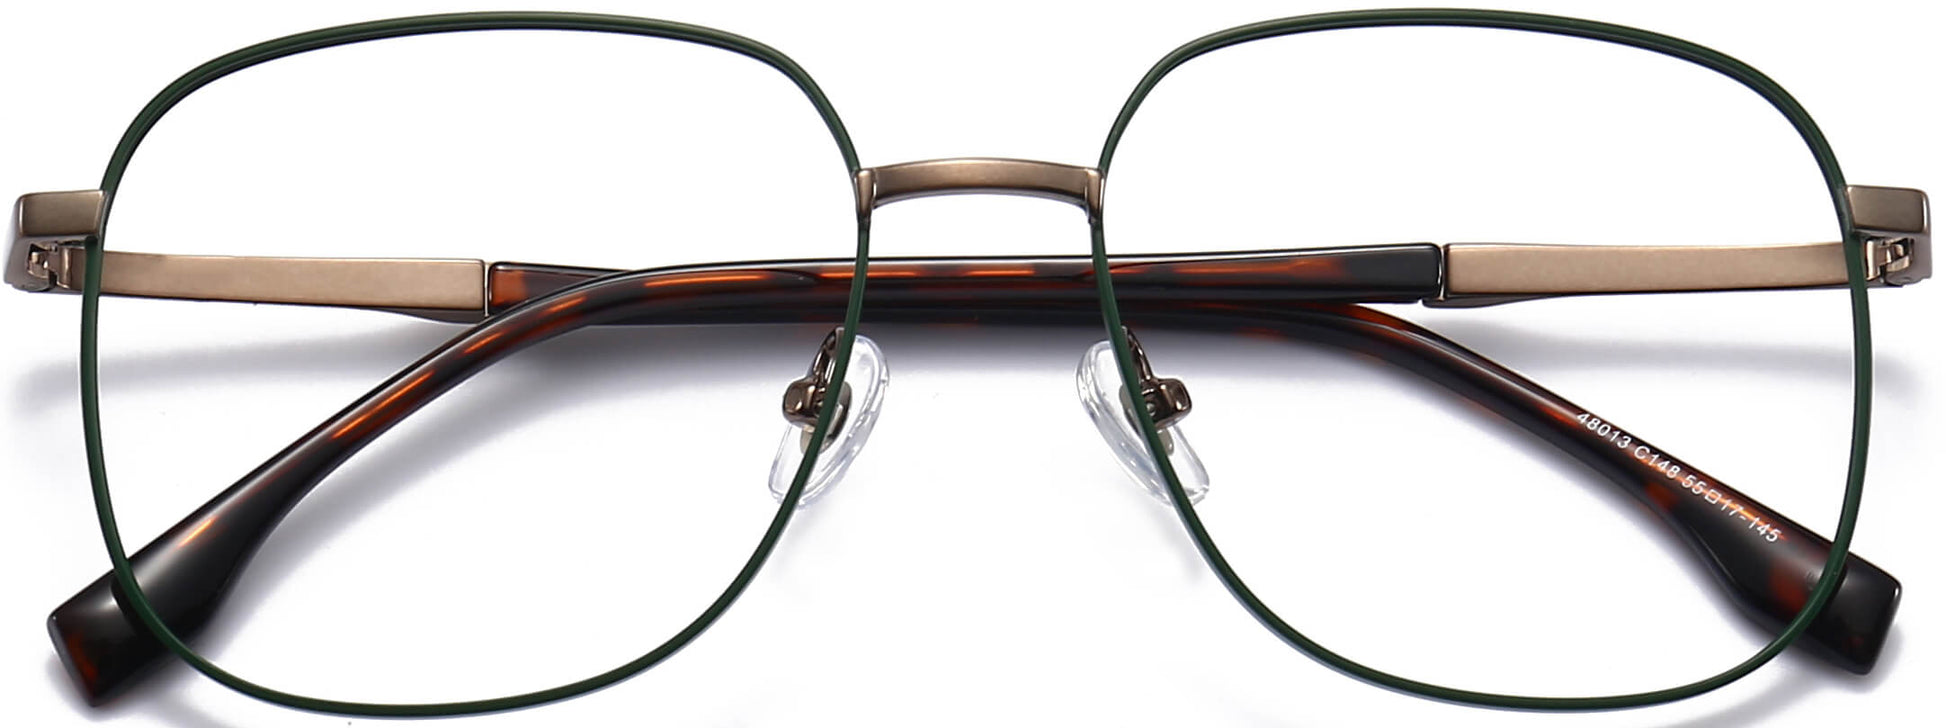 Azariah Square Green Eyeglasses from ANRRI, closed view